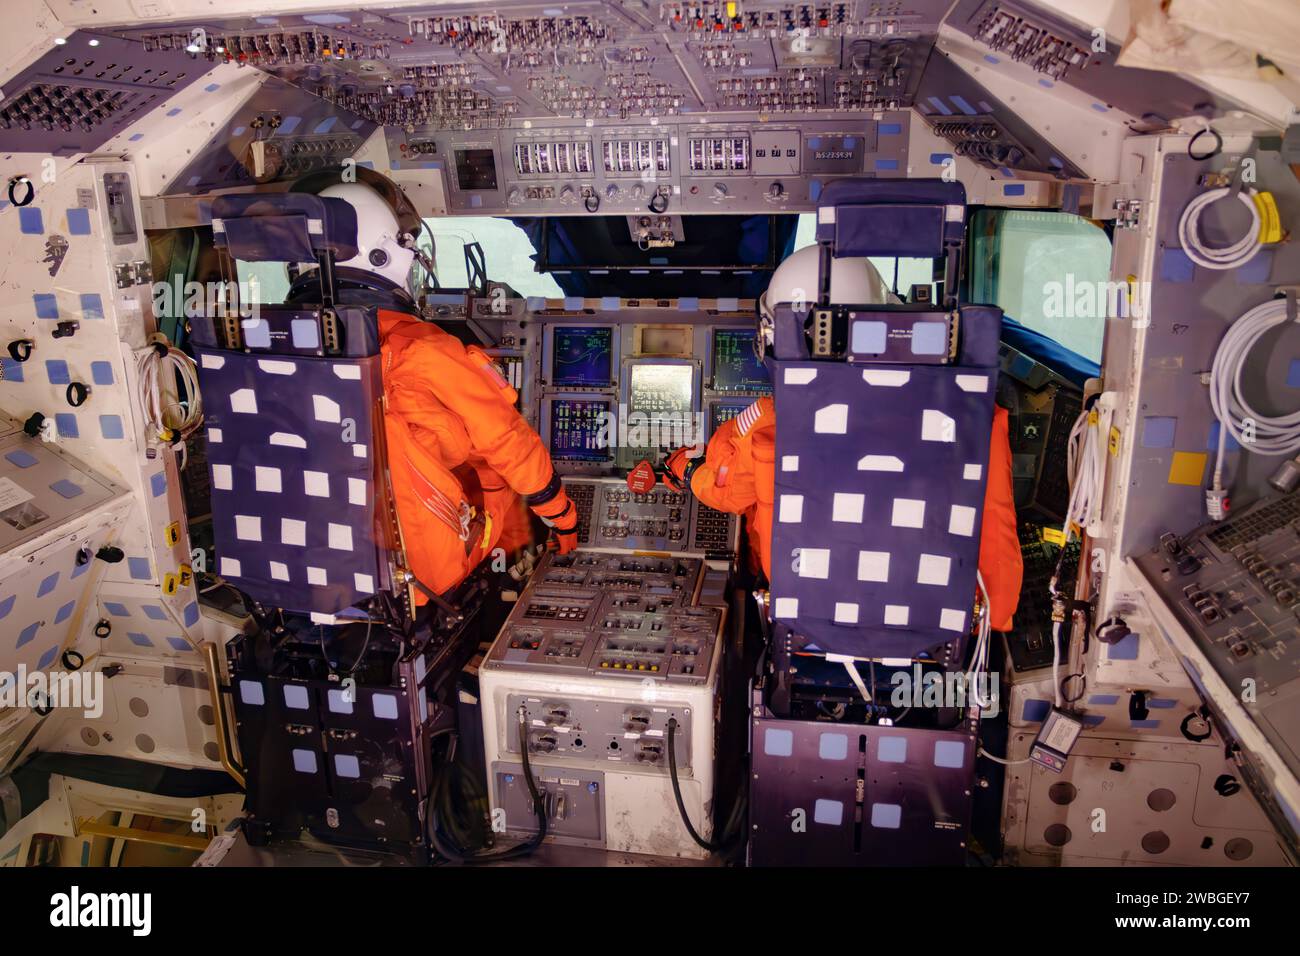 Commander and Pilot Stations. Space Shuttle Crew Compartment Trainer. CCT-1. The National Museum of the United States Air Force, Dayton, Ohio, USA. Fo Stock Photo